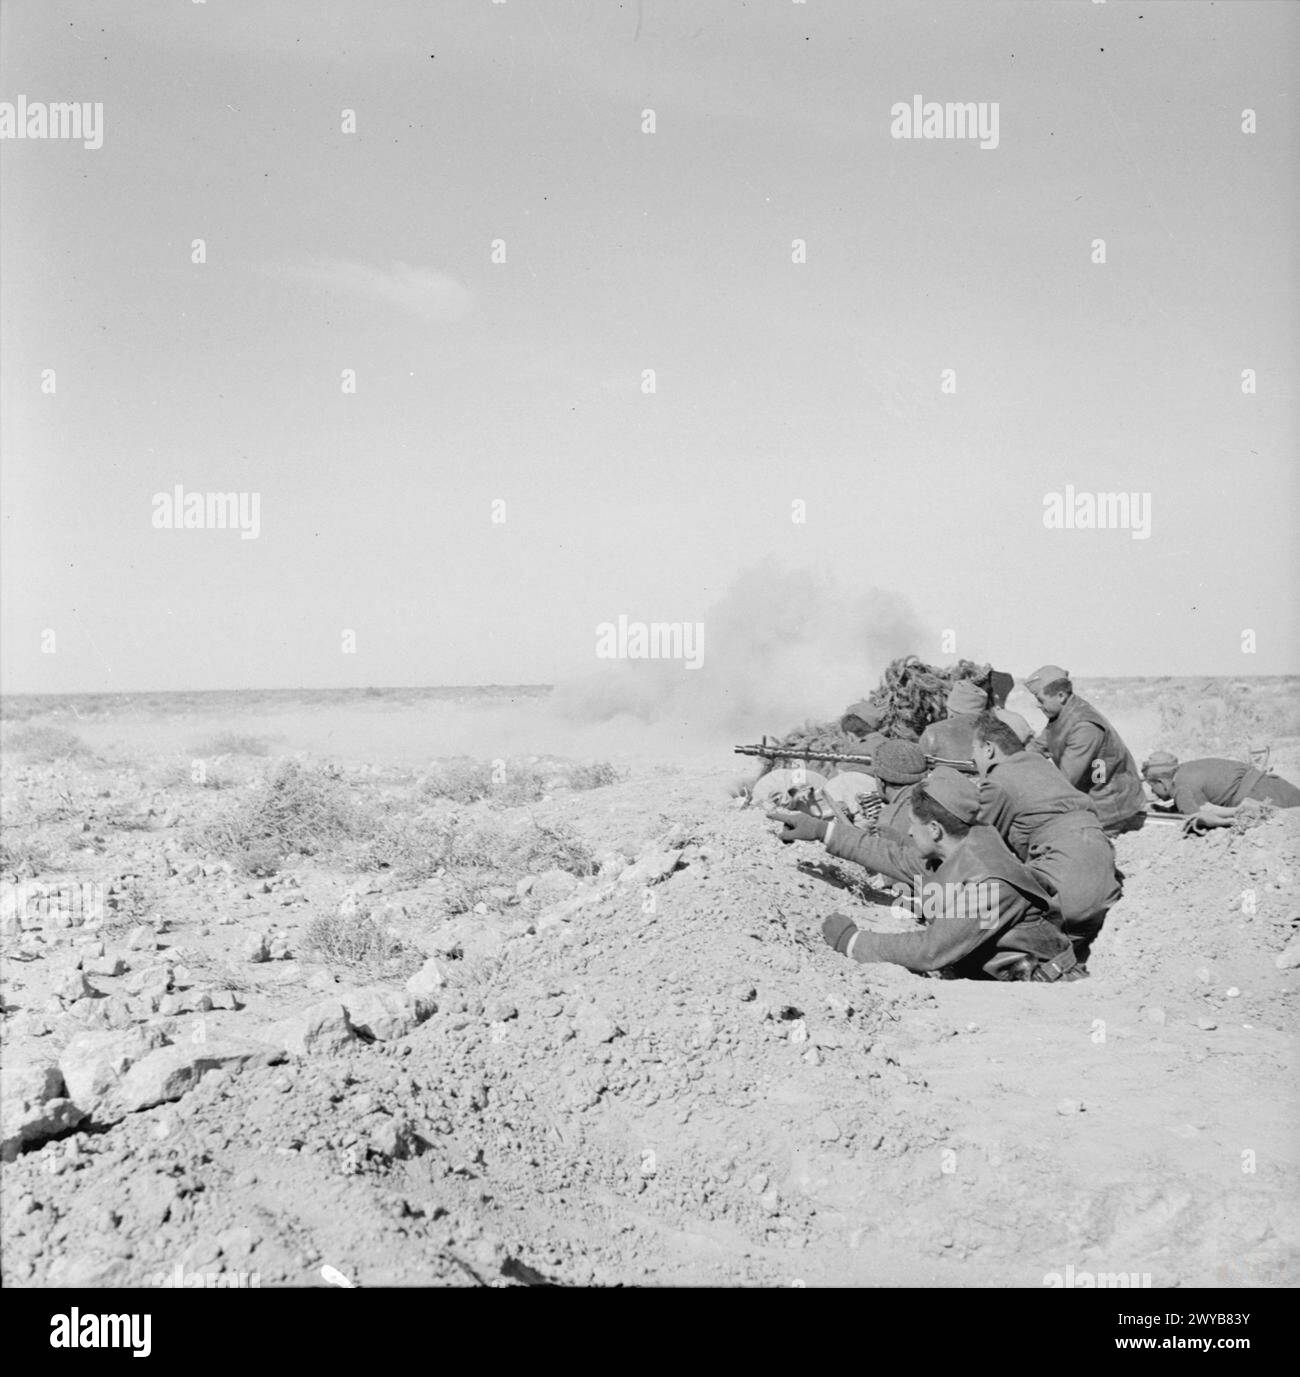 THE POLISH ARMY IN THE WESTERN DESERT CAMPAIGN, 1940-1942 - Troops of (probably) the Independent Heavy Machine Gun Company firing a captured German MG34 machine gun from an advanced post. These pictures taken at the extreme forward positions around Carmuset er Regem (Karmusat ar Rijam) area near Gazala, show infantry and artillery units of the Polish Independent Carpathian Rifles Brigade facing German and Italian forces. , British Army, Polish Army, Polish Armed Forces in the West, Independent Carpathian Rifles Brigade, Polish Armed Forces in the West, Polish Independent Carpathian Rifles Brig Stock Photo